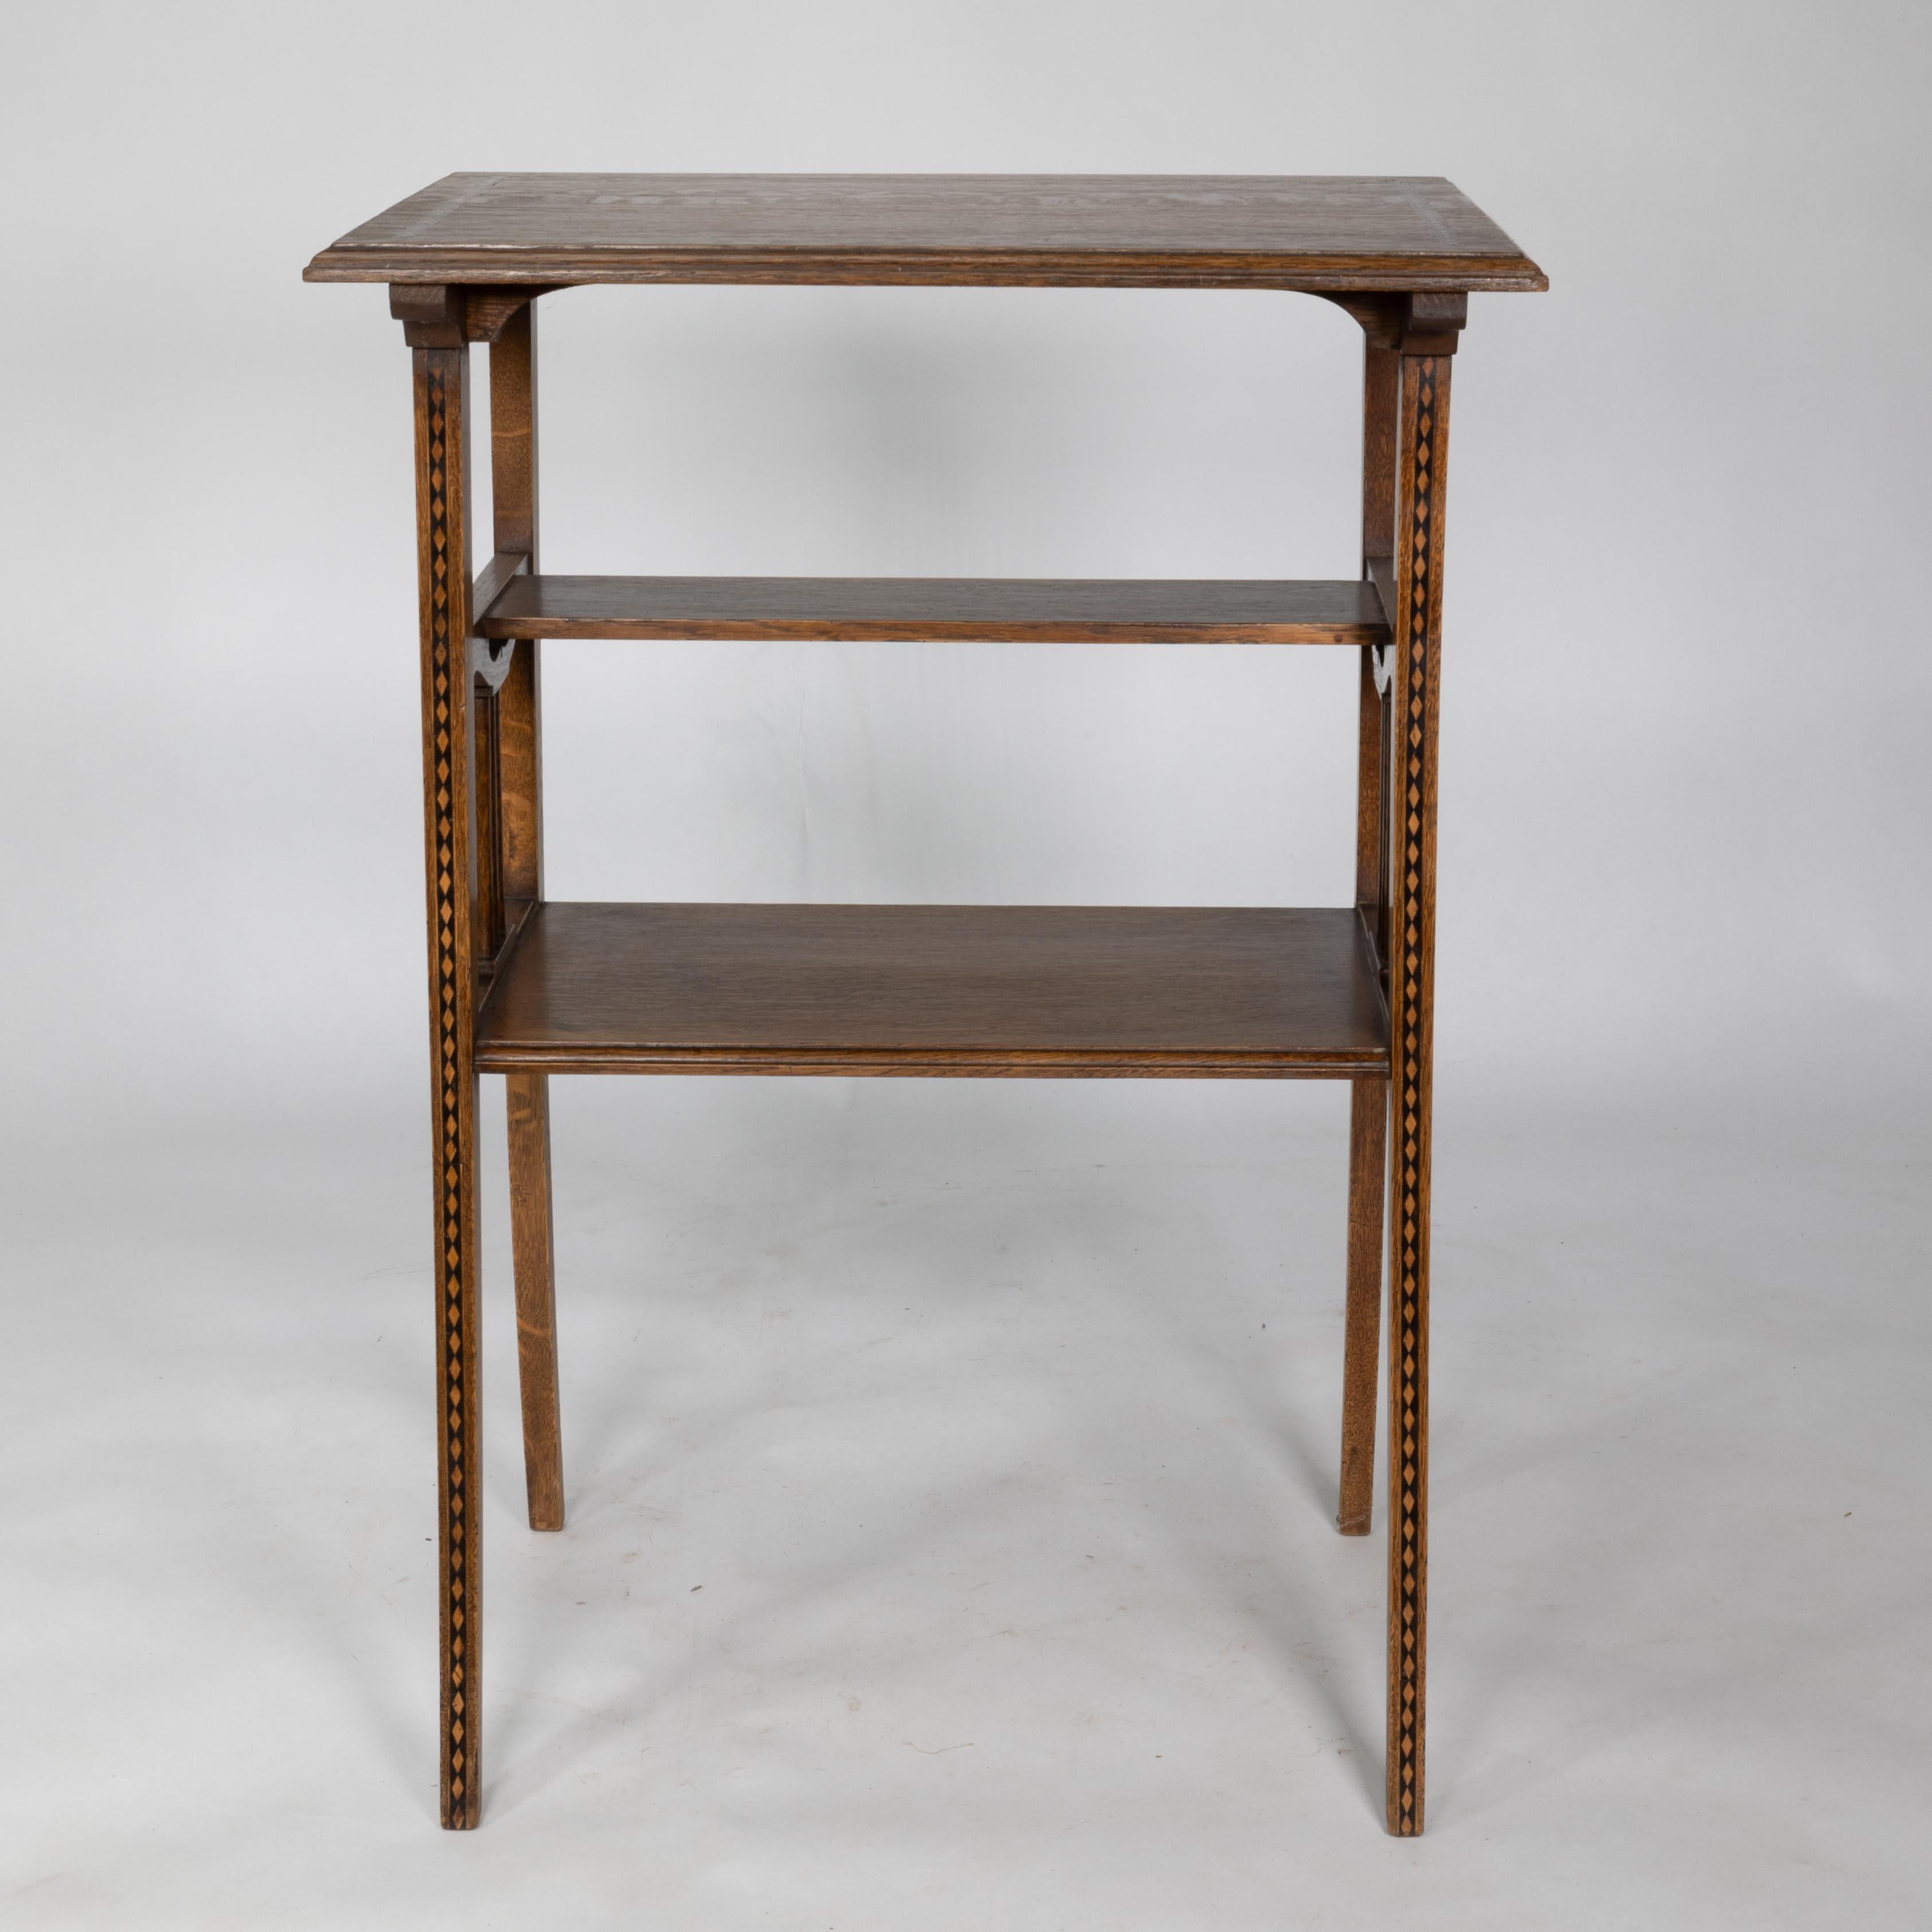 George Walton style of. A pair of Arts & Crafts inlaid oak side table For Sale 1